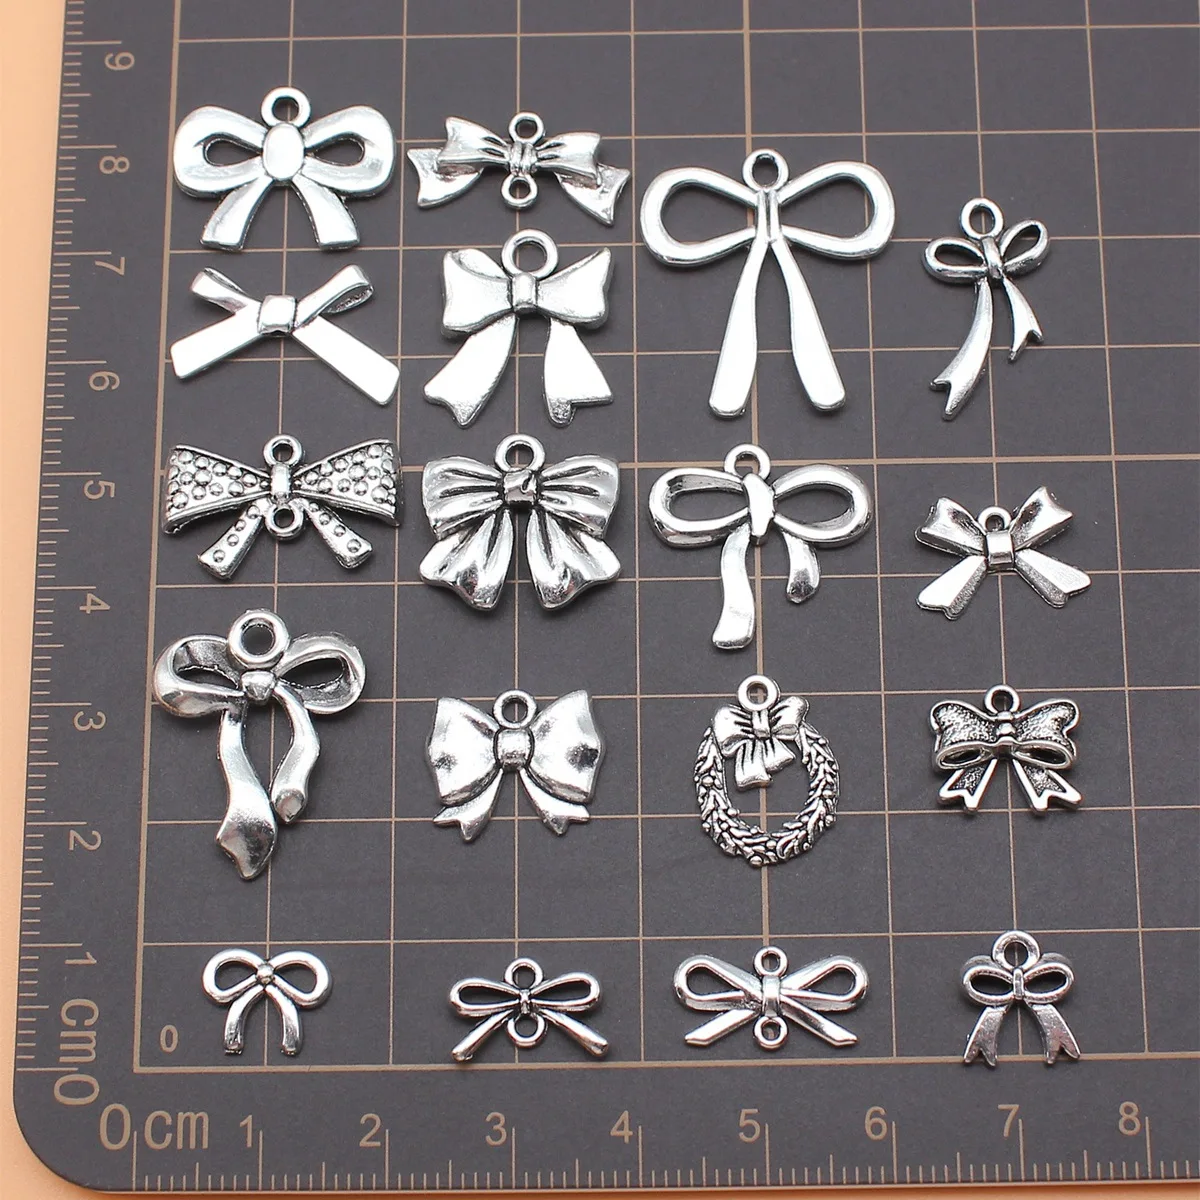 15Pcs Silver Plated Bow Charms DIY Bow-tie Pendants For Jewelry Making  Handmade Necklace Earrings Accessories School Teens Girls Matching Ornaments